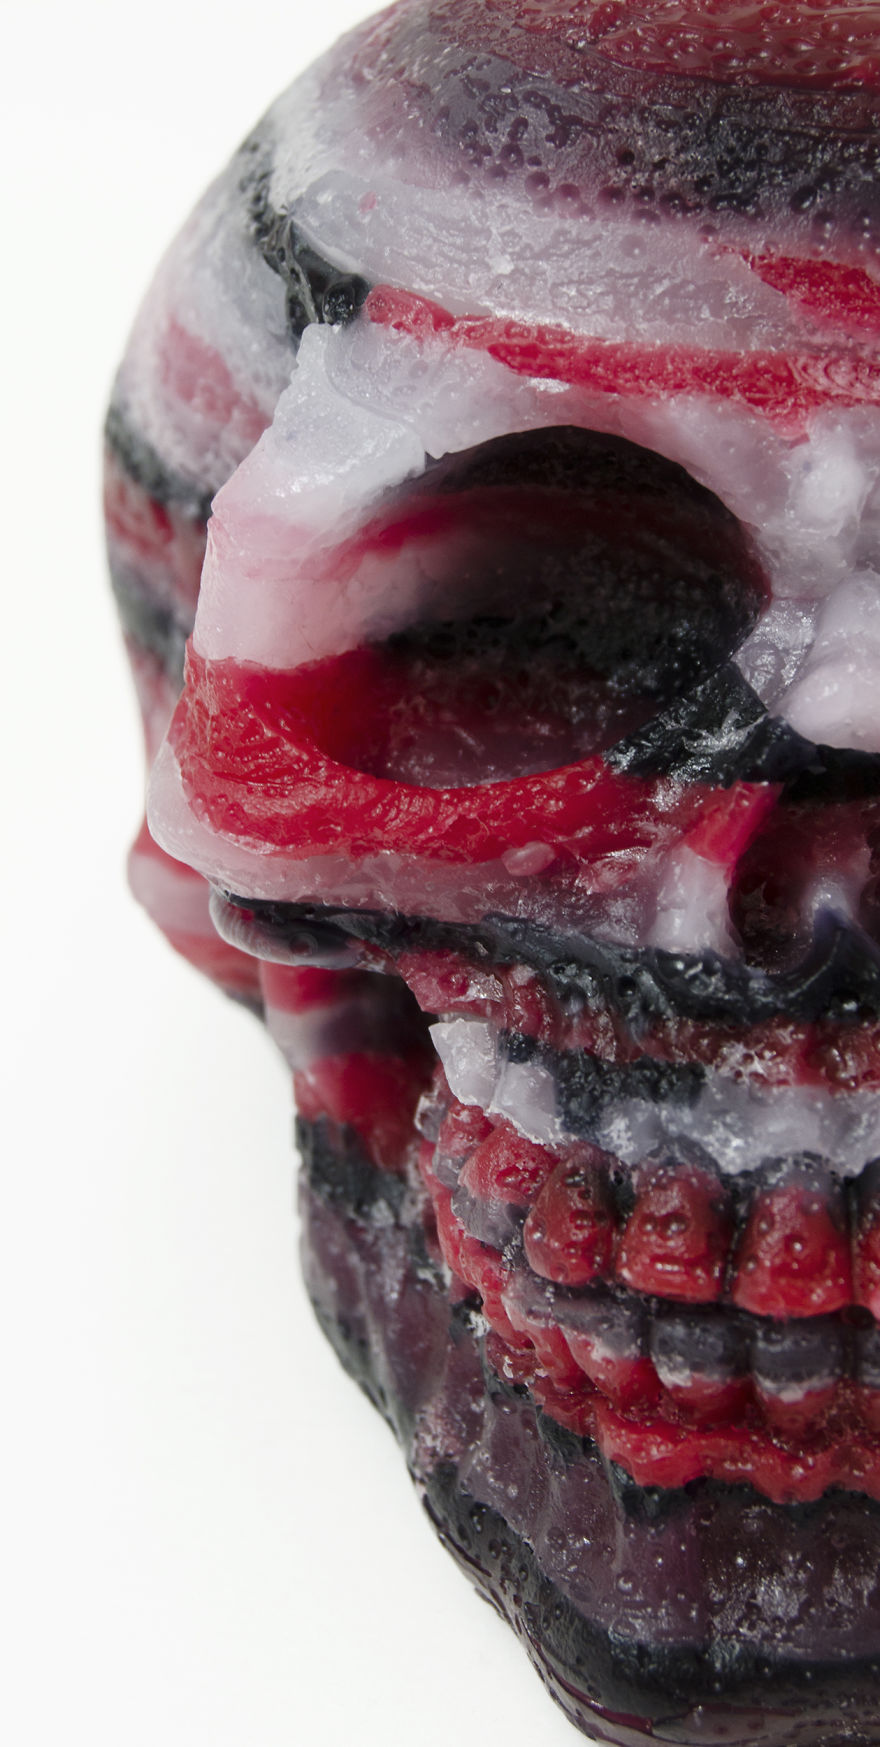 I Made Skull Sculptures With Melted Wax